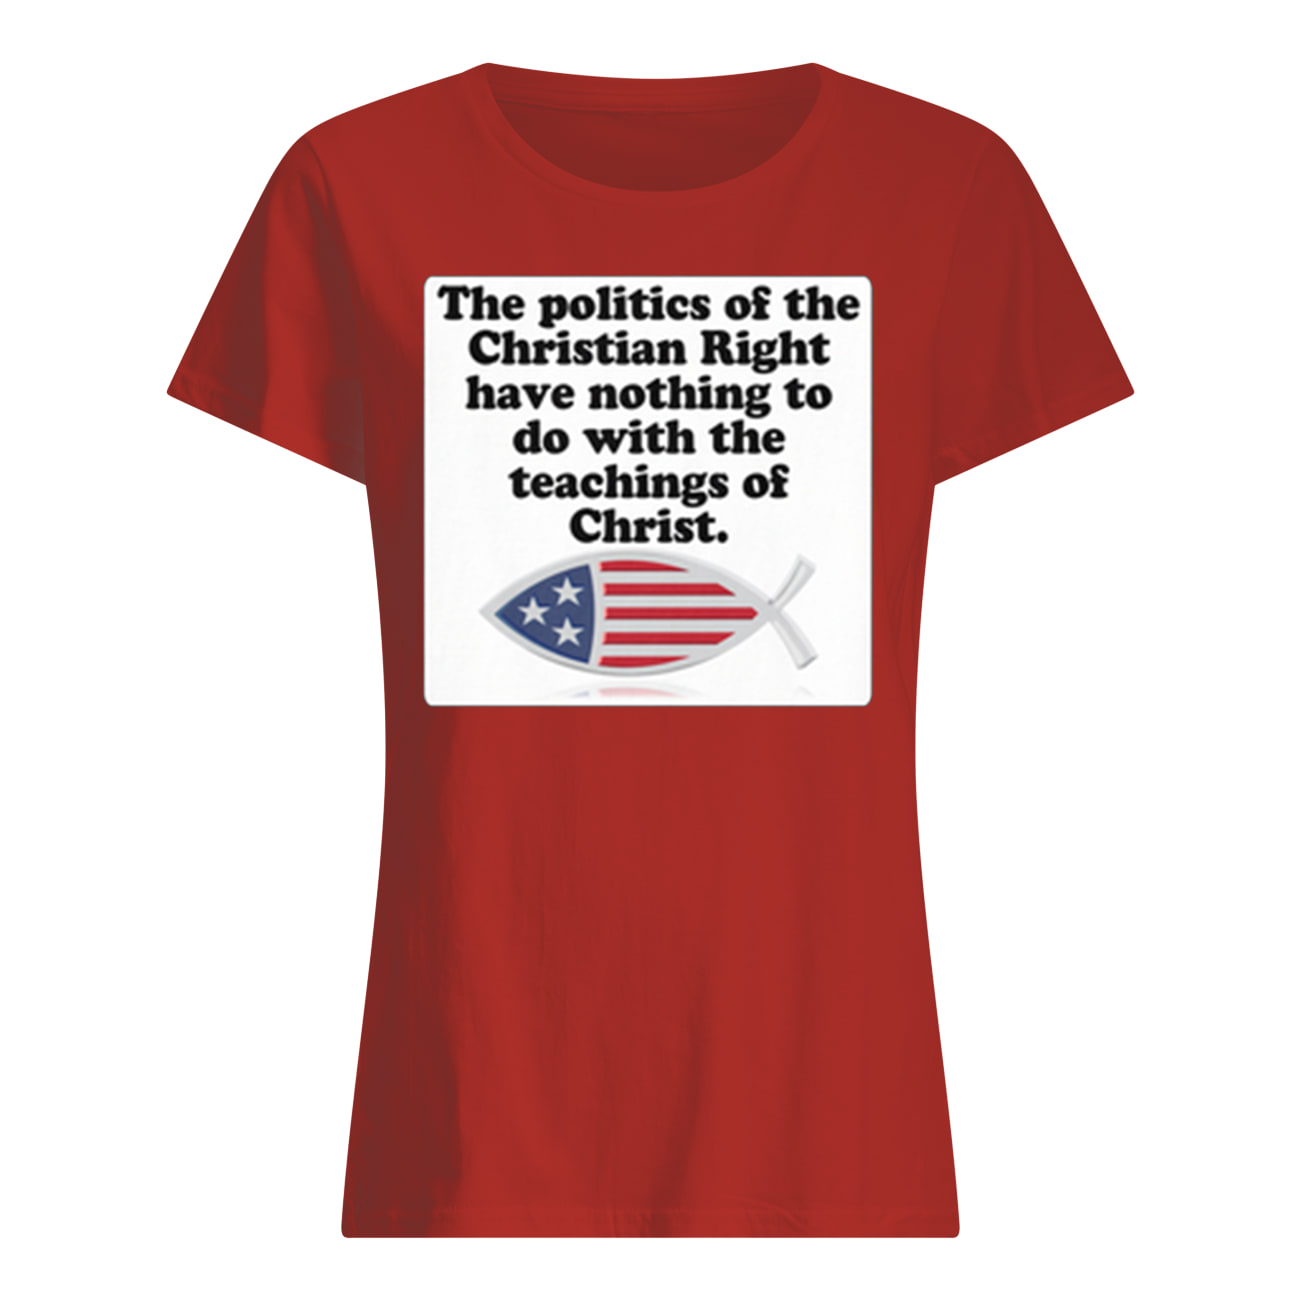 The poltics of the Christian right have nothing to do with the teaching of Christ womens shirt